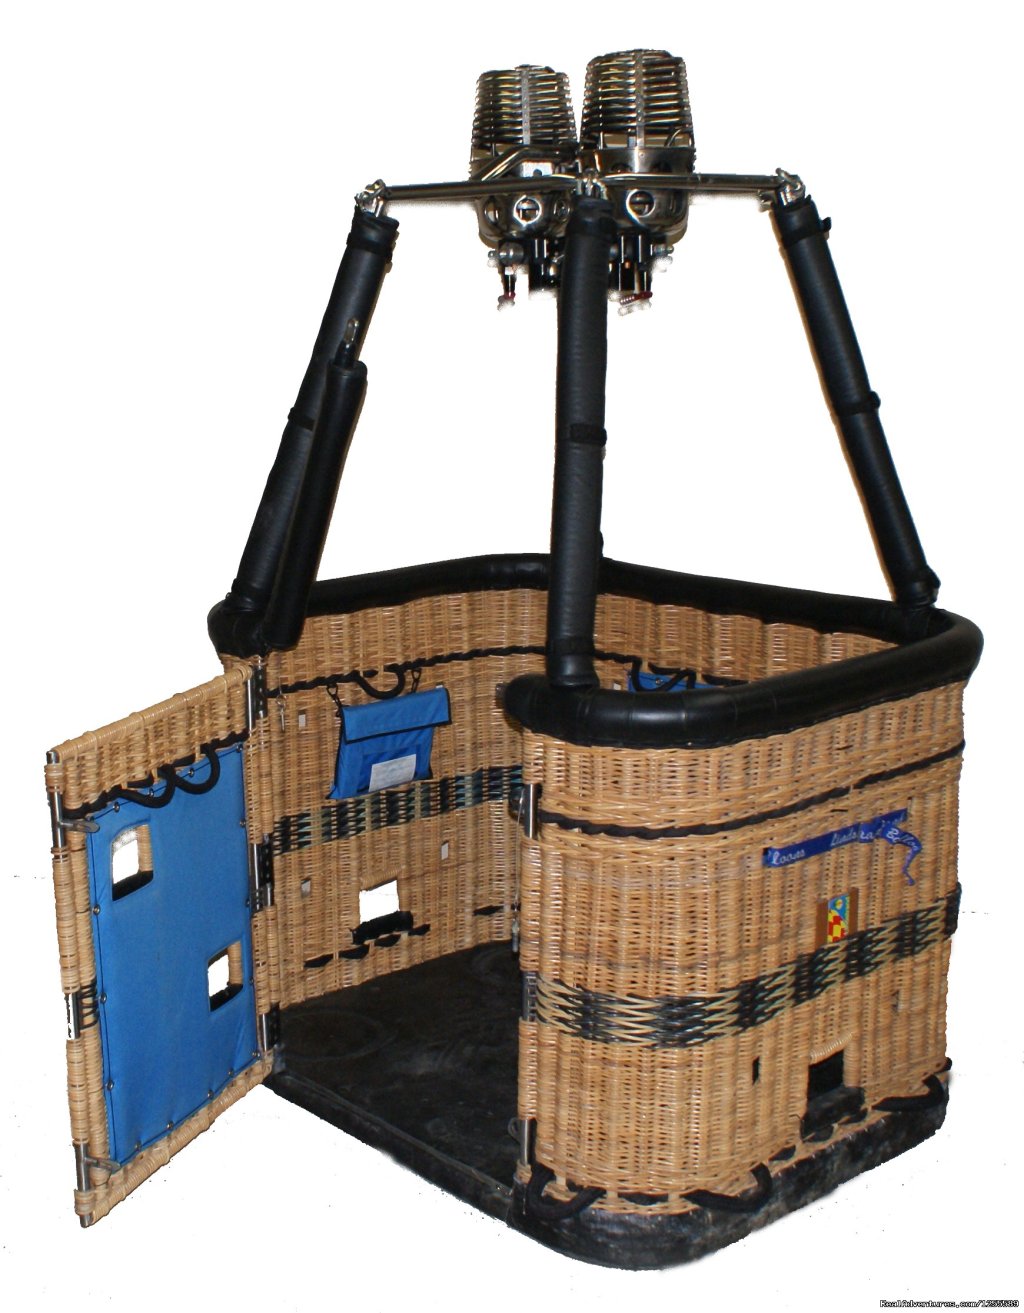 The Easy Access Basket | Midwest Balloon Rides | Image #2/4 | 